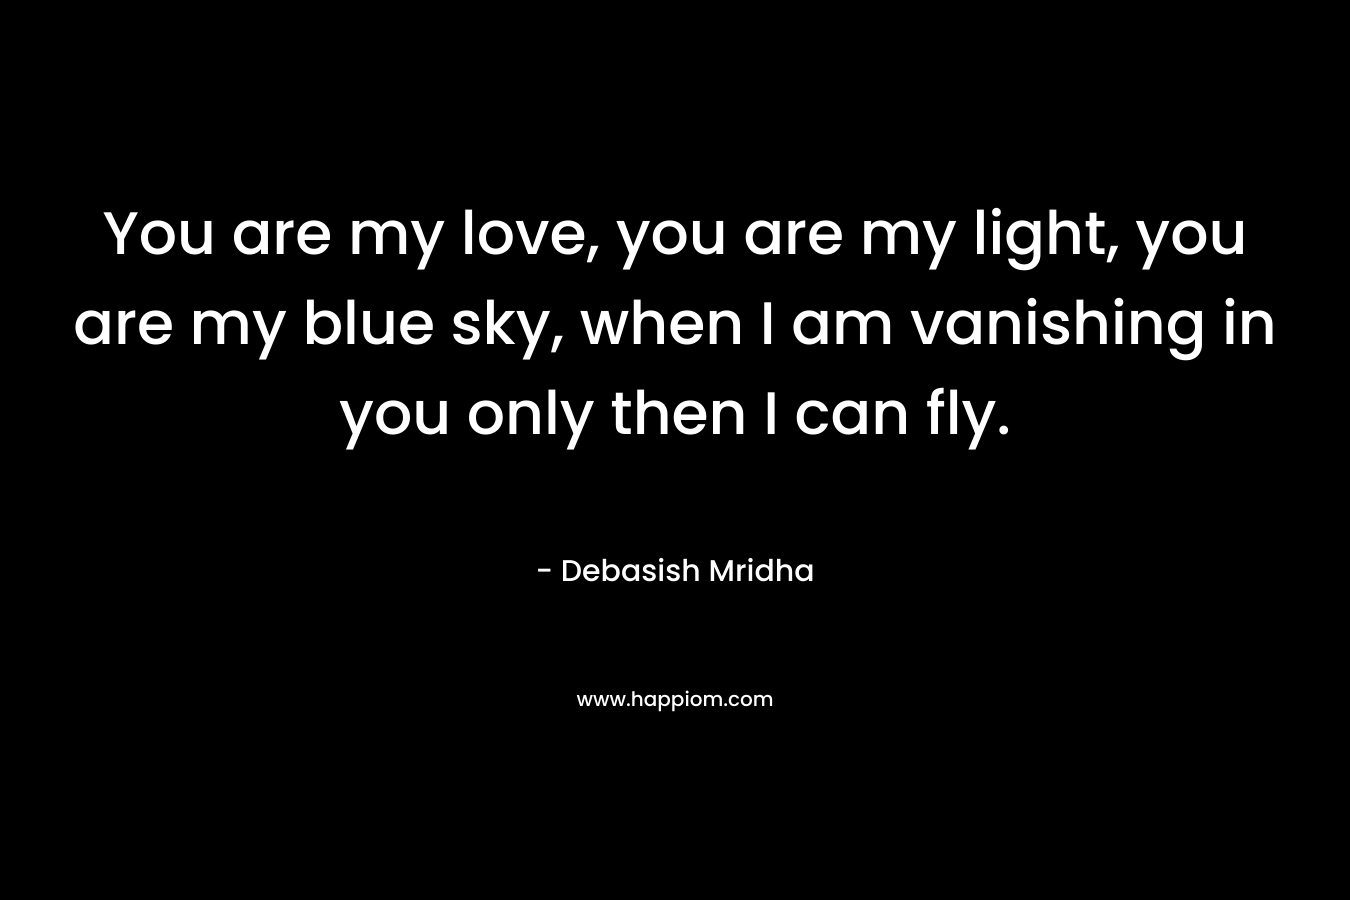 You are my love, you are my light, you are my blue sky, when I am vanishing in you only then I can fly.